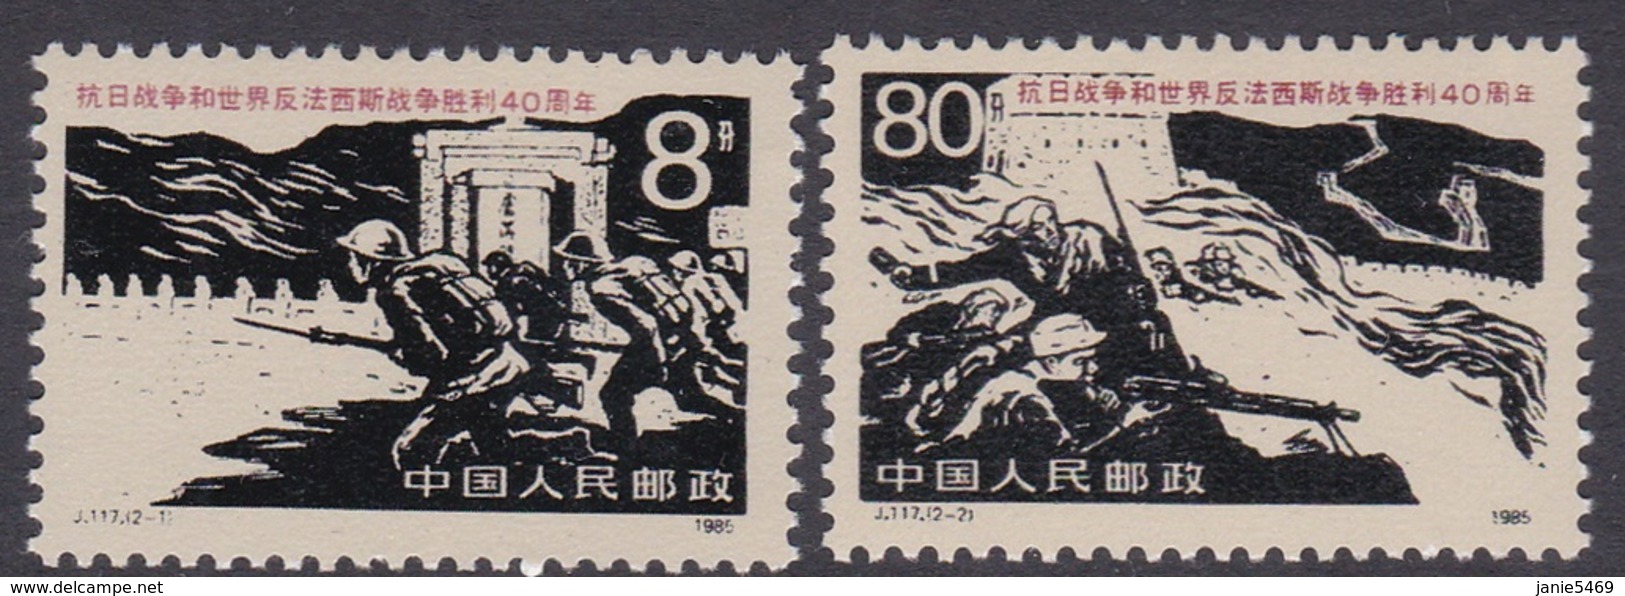 China People's Republic SG 3406-3407 1985 40th Anniversary Victory Over Japan, Mint Never Hinged - Unused Stamps